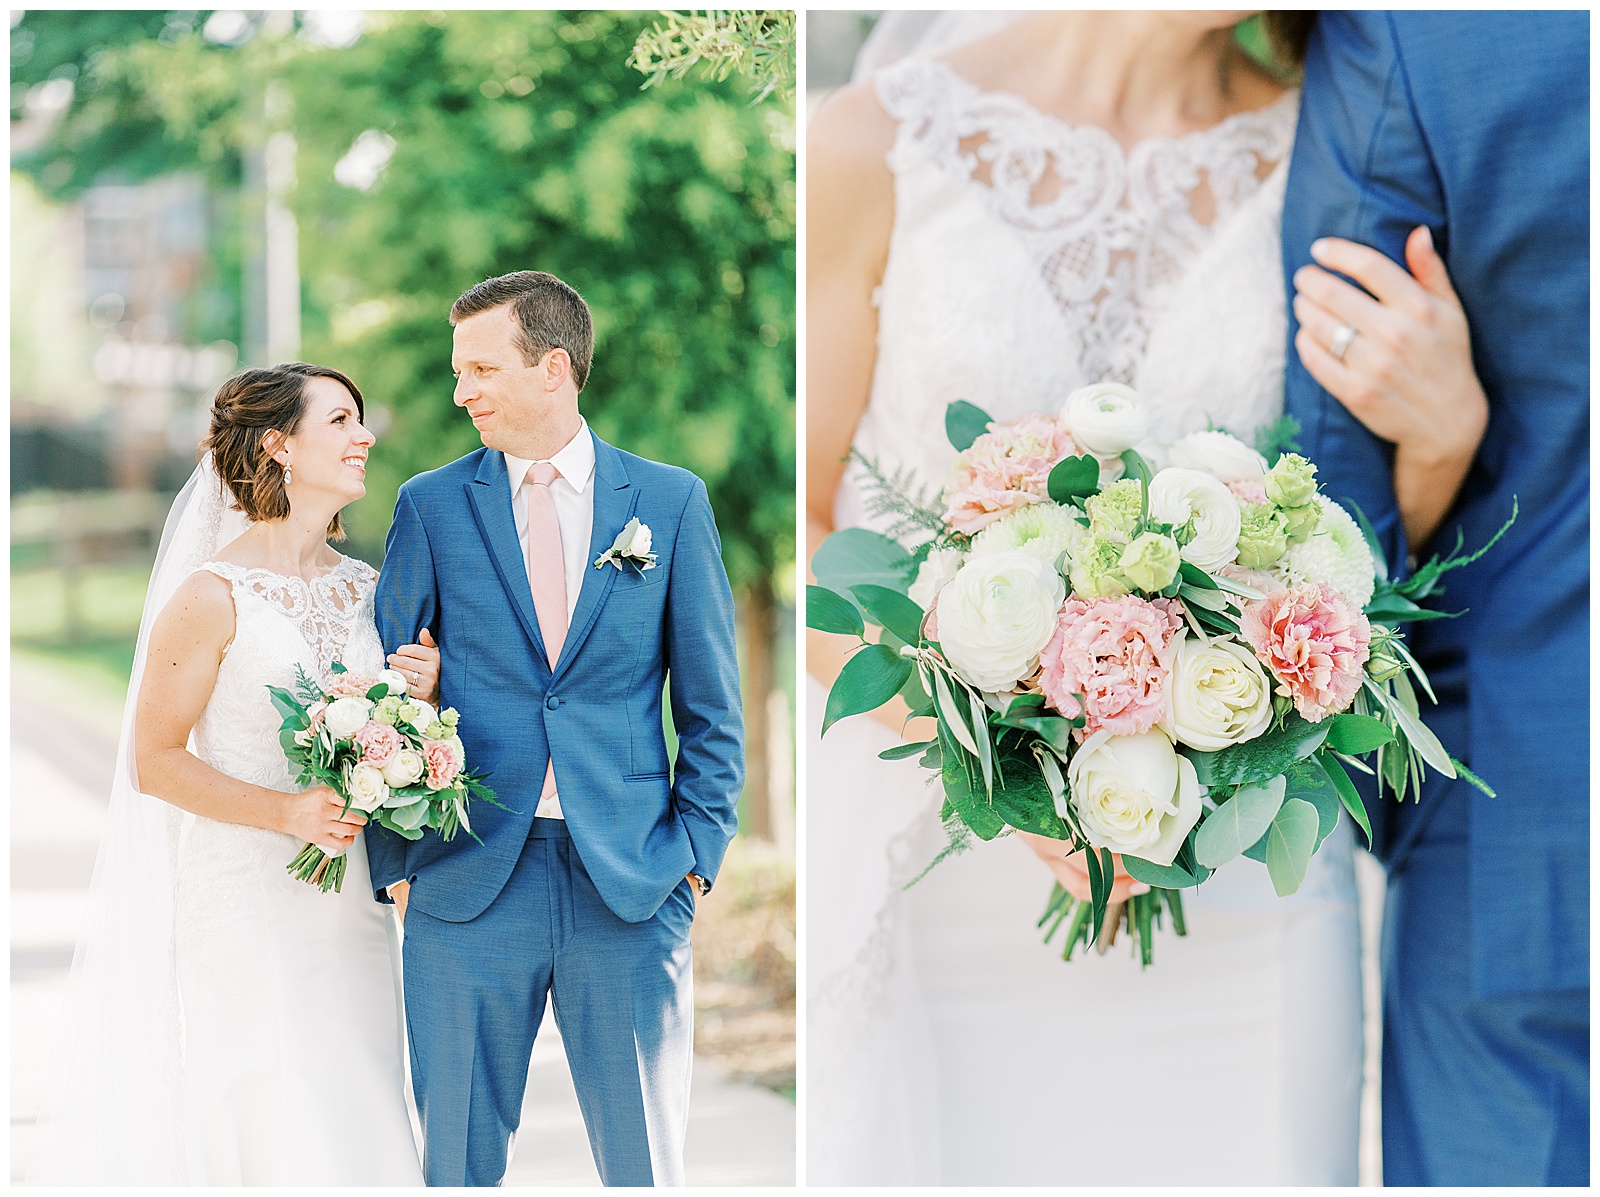 outdoor summer bride groom portraits on city sidewalk of short brown haired bride in lace dress with long train and navy blue suited groom